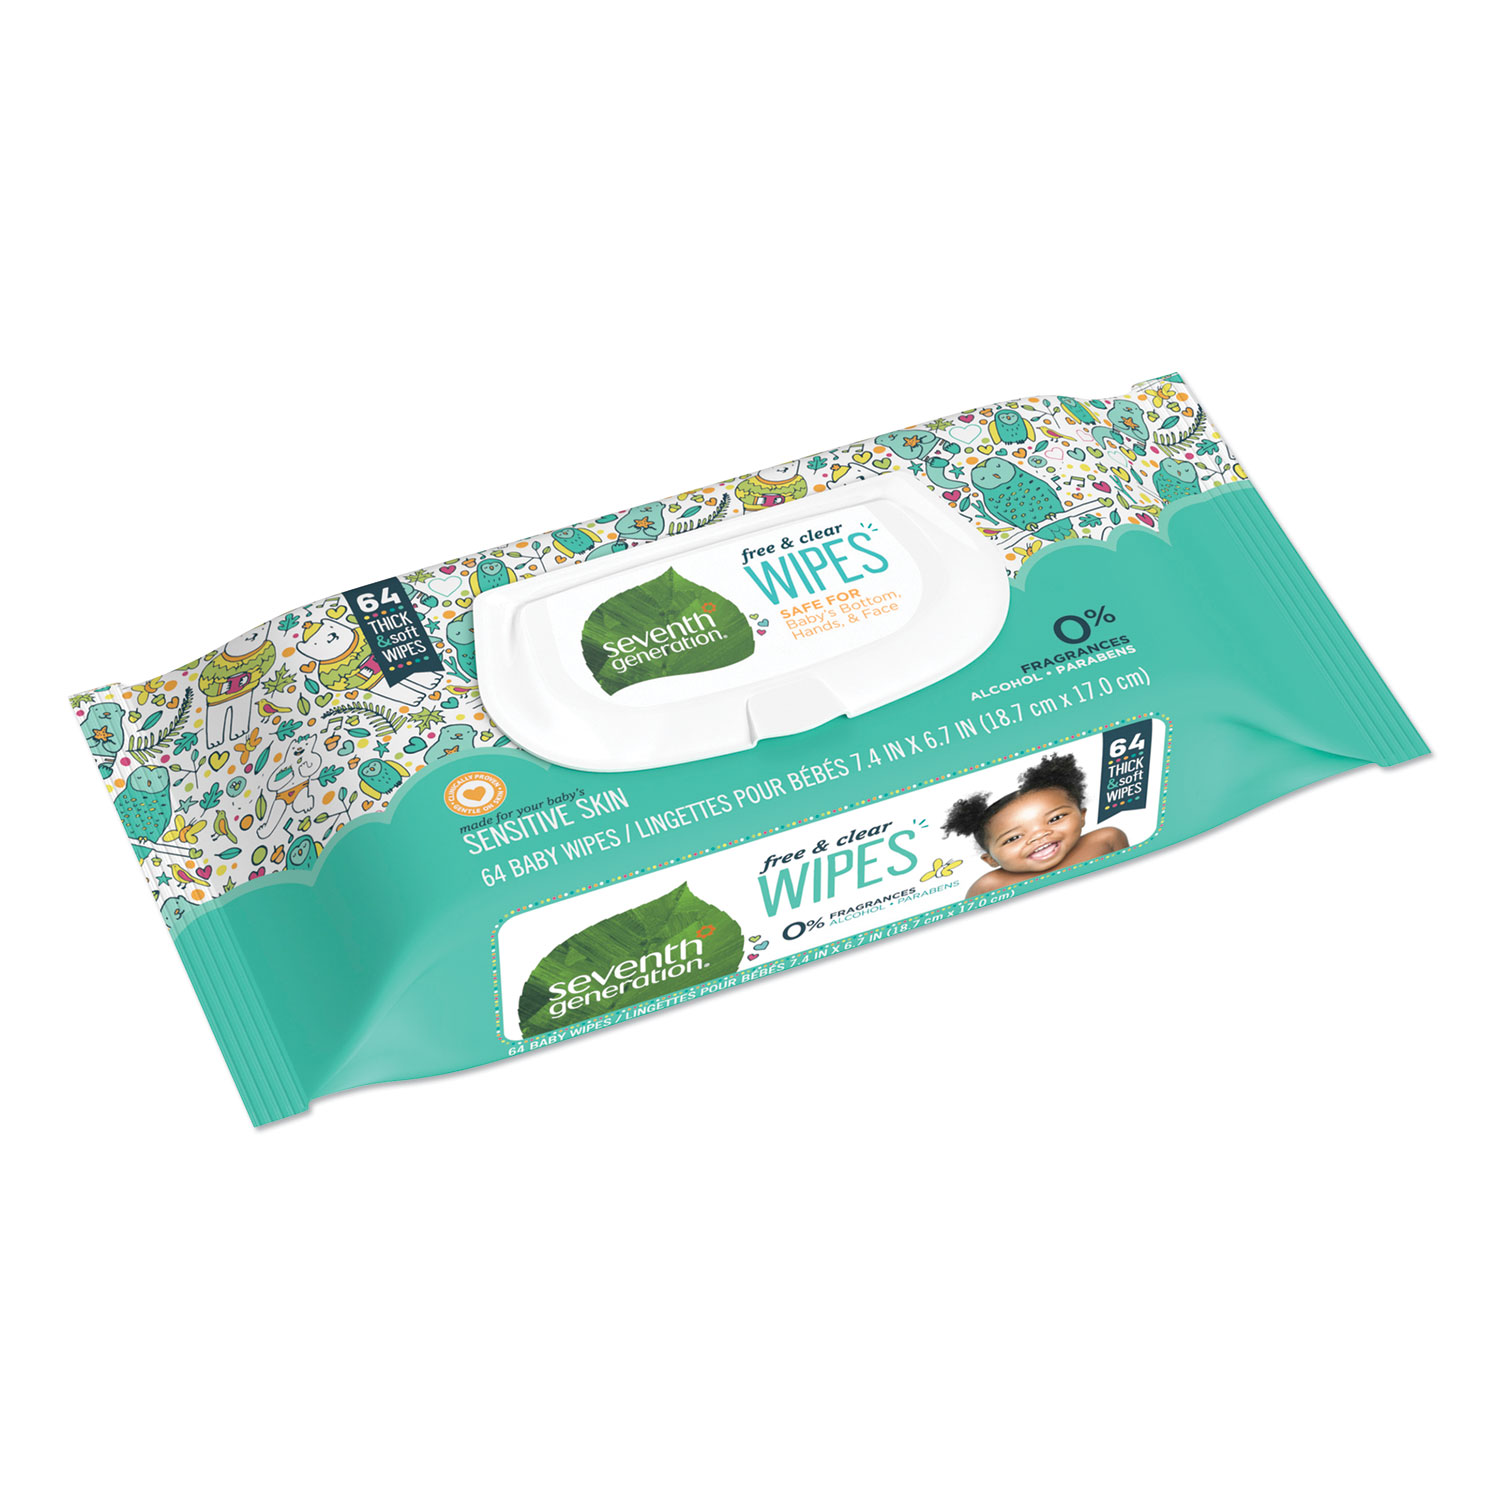  Seventh Generation SEV 34208CT Free & Clear Baby Wipes, Unscented, White, 64/PK, 12 PK/CT (SEV34208CT) 